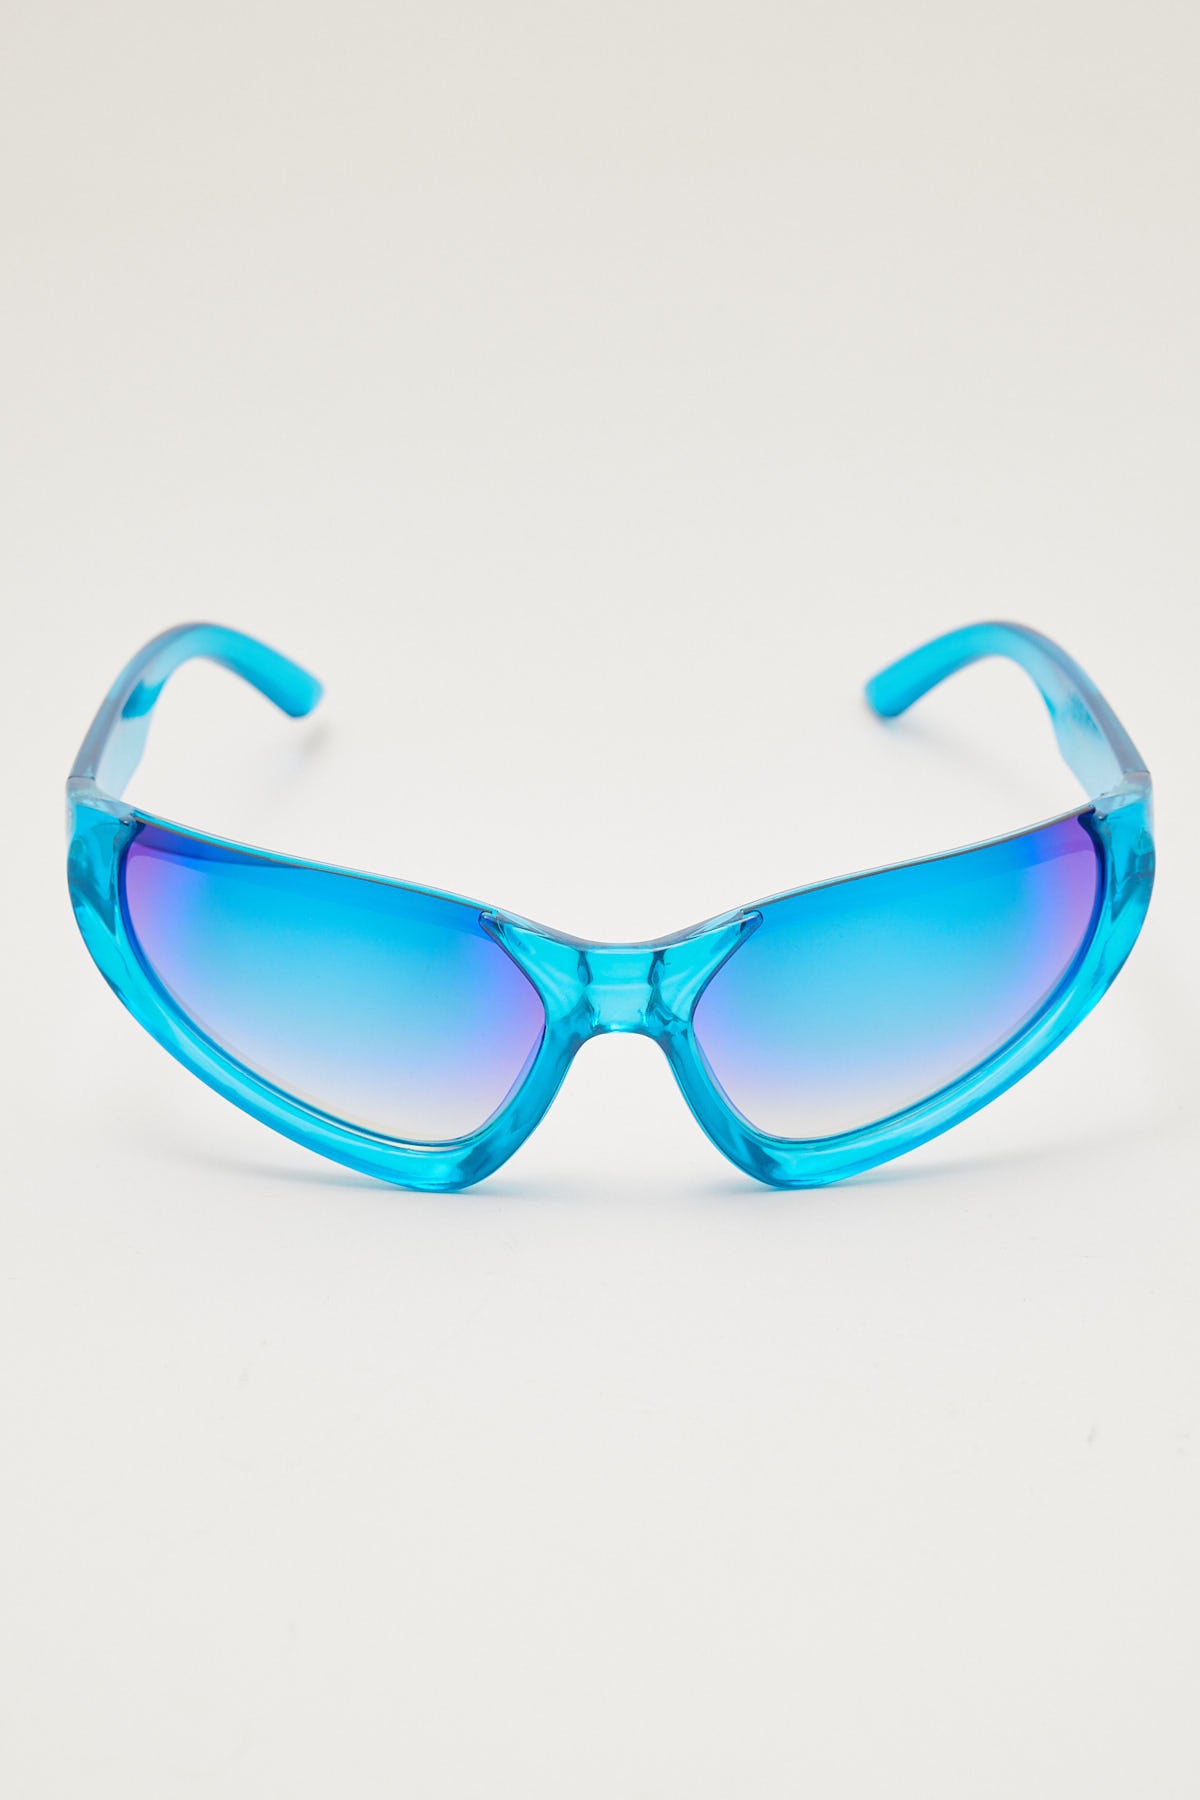 Angels Whisper Frosted Sunglasses Blue